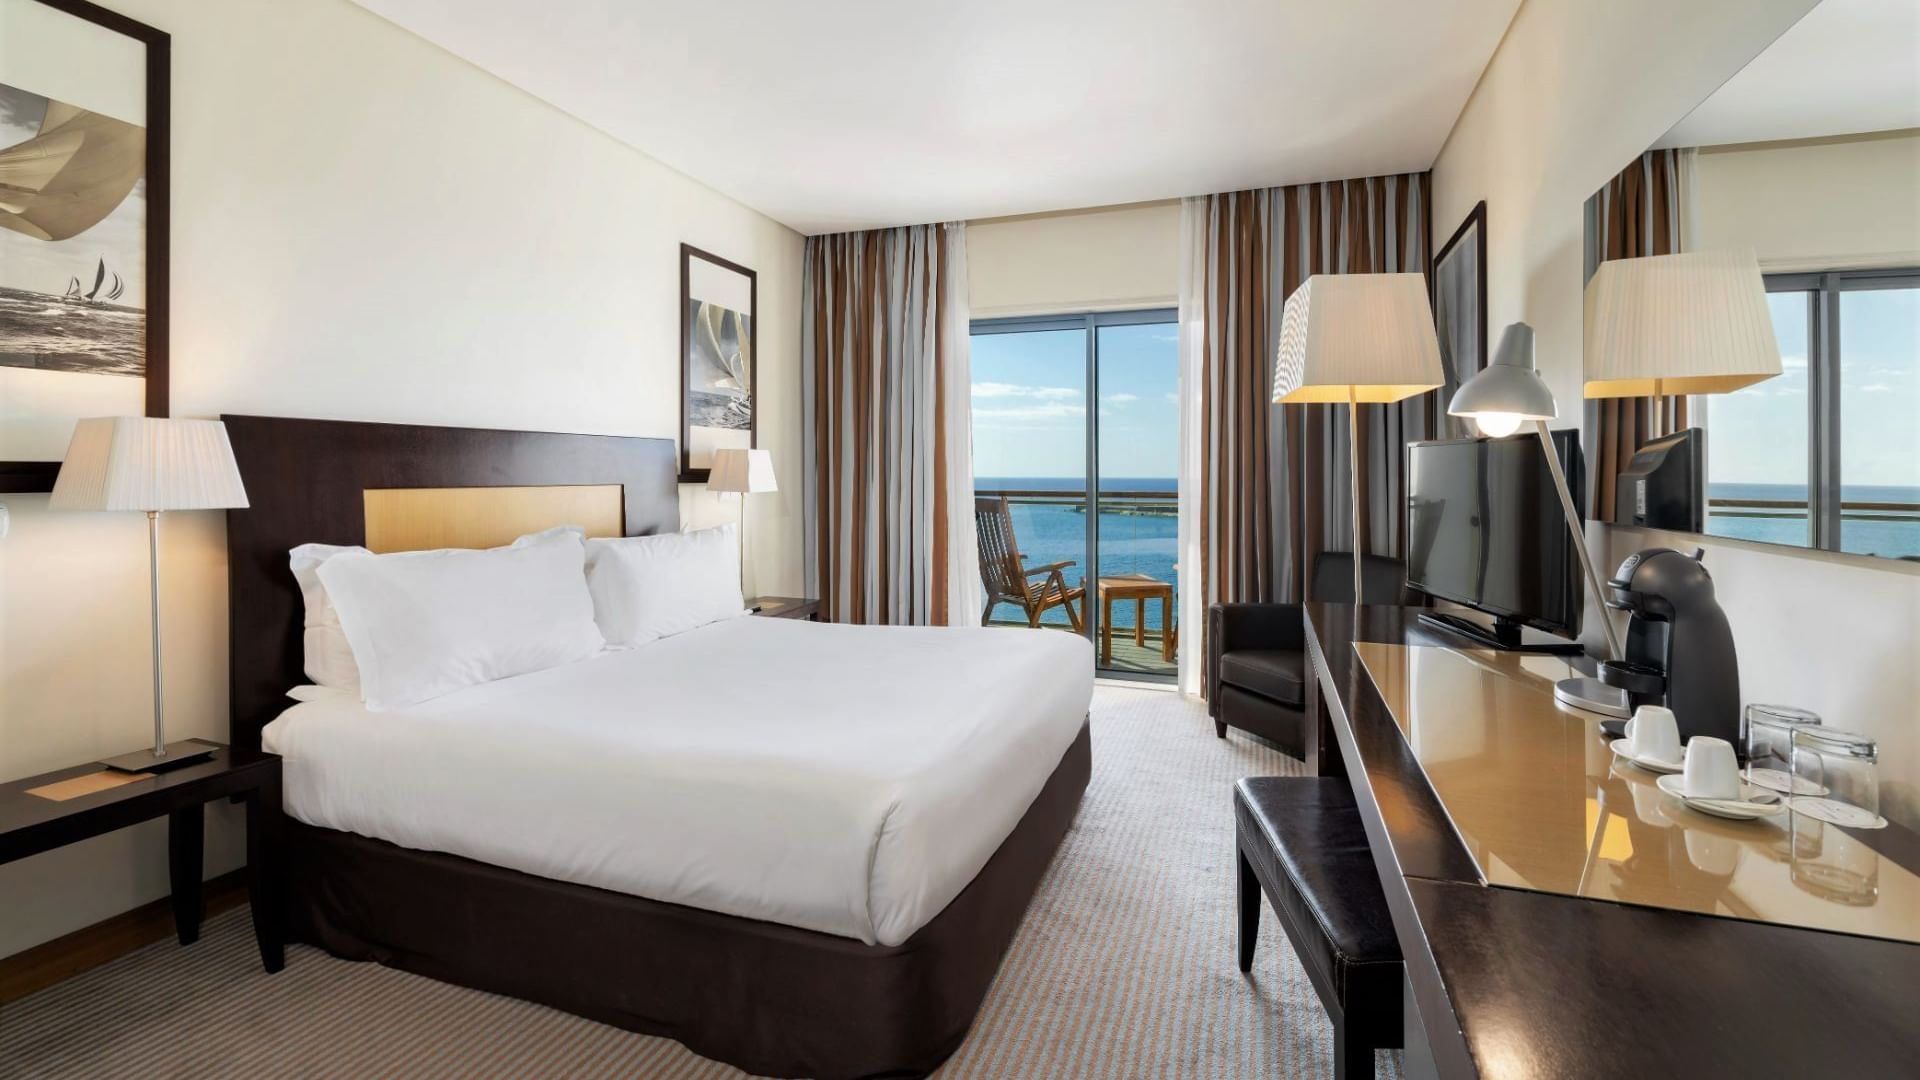 King bed, coffee station, lamps, TV & balcony with ocean view in Executive Ocean View Room at Hotel Marina Atlântico